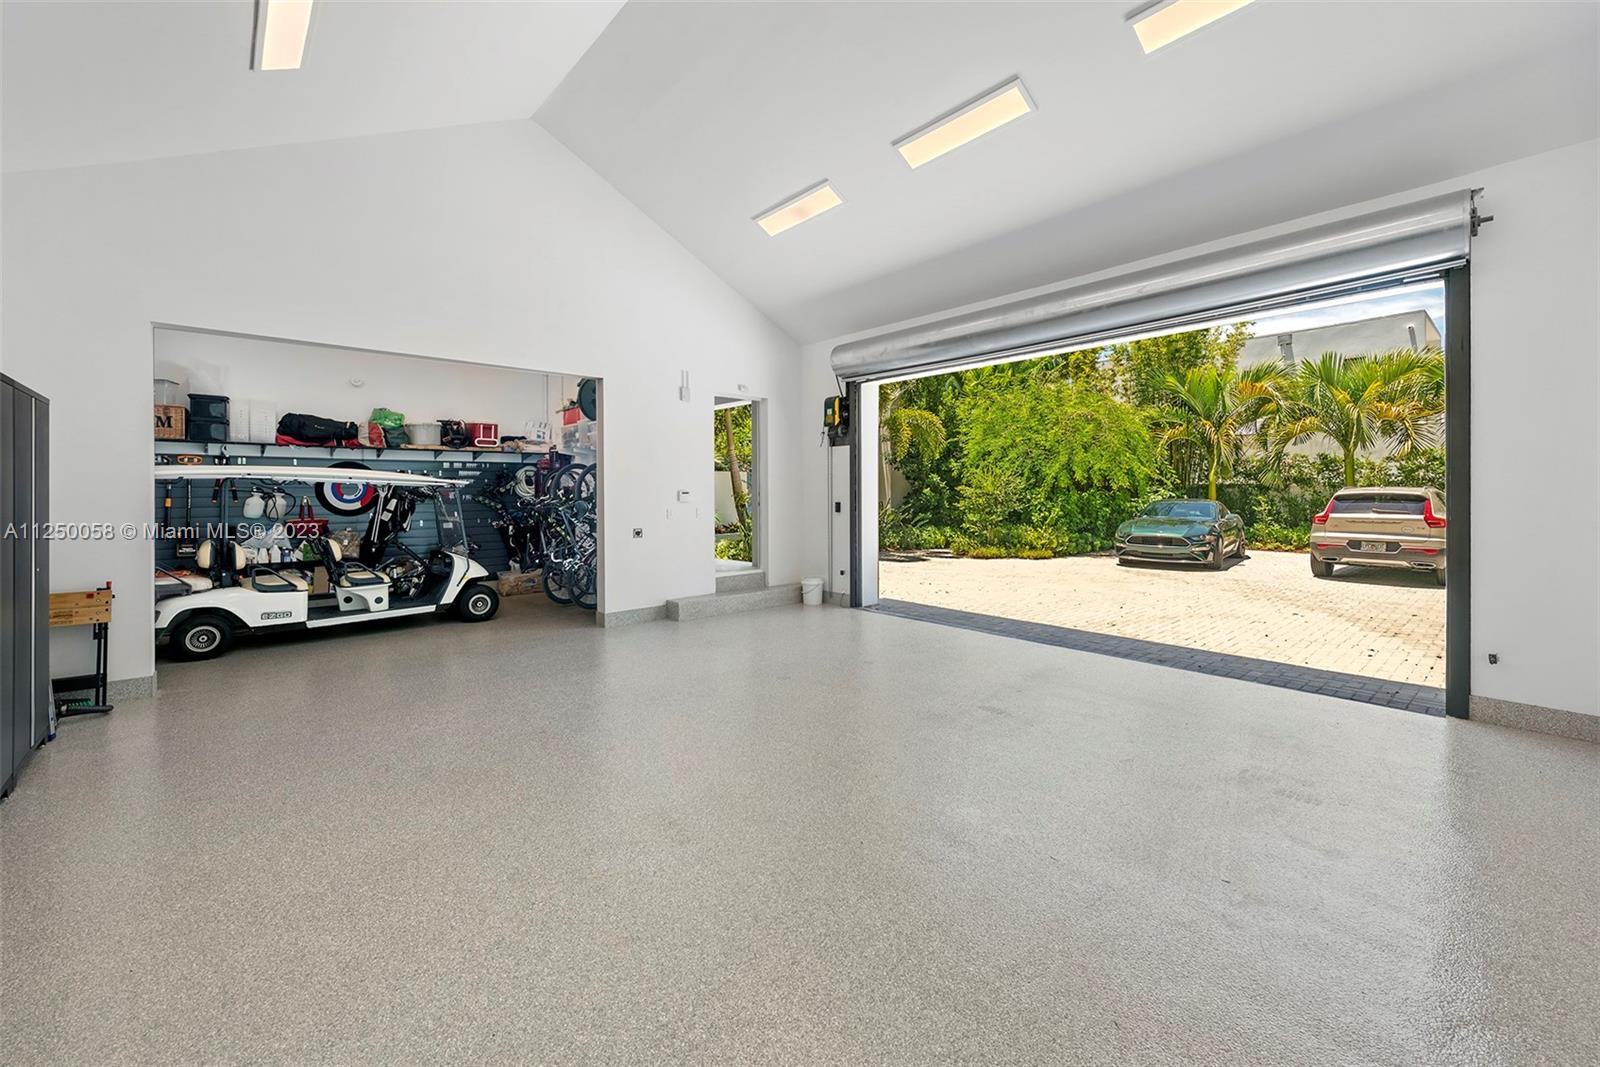 HIGH CEILING GARAGE WITH SEPARATE GOLF CART PARKING AND ELECTRIC CAR CHARGES